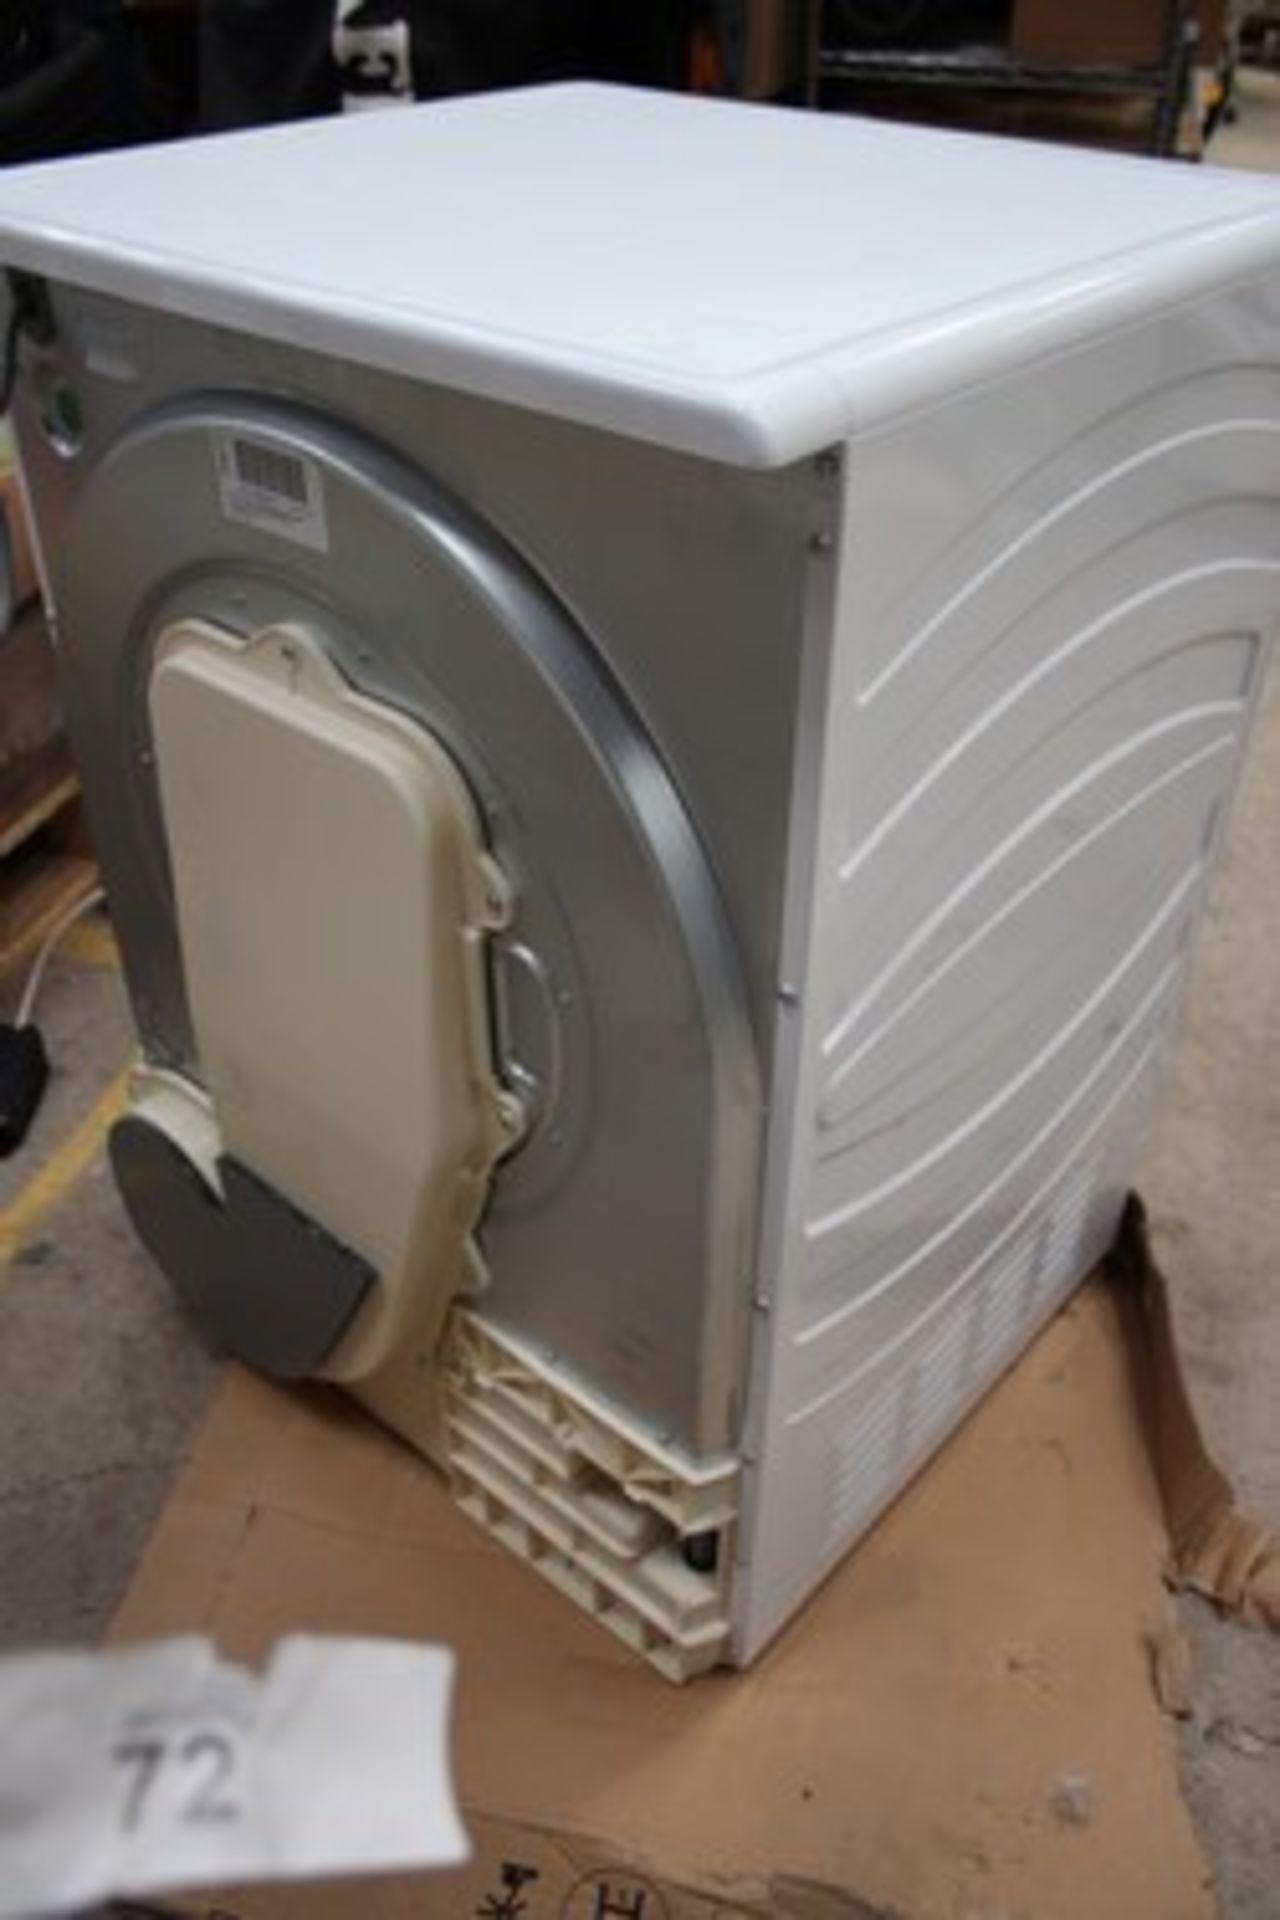 1 x Hoover 8kg heat pump tumble dryer, model: HLEH8A2TE, white, no visible damage, powers on, (56) - - Image 4 of 4